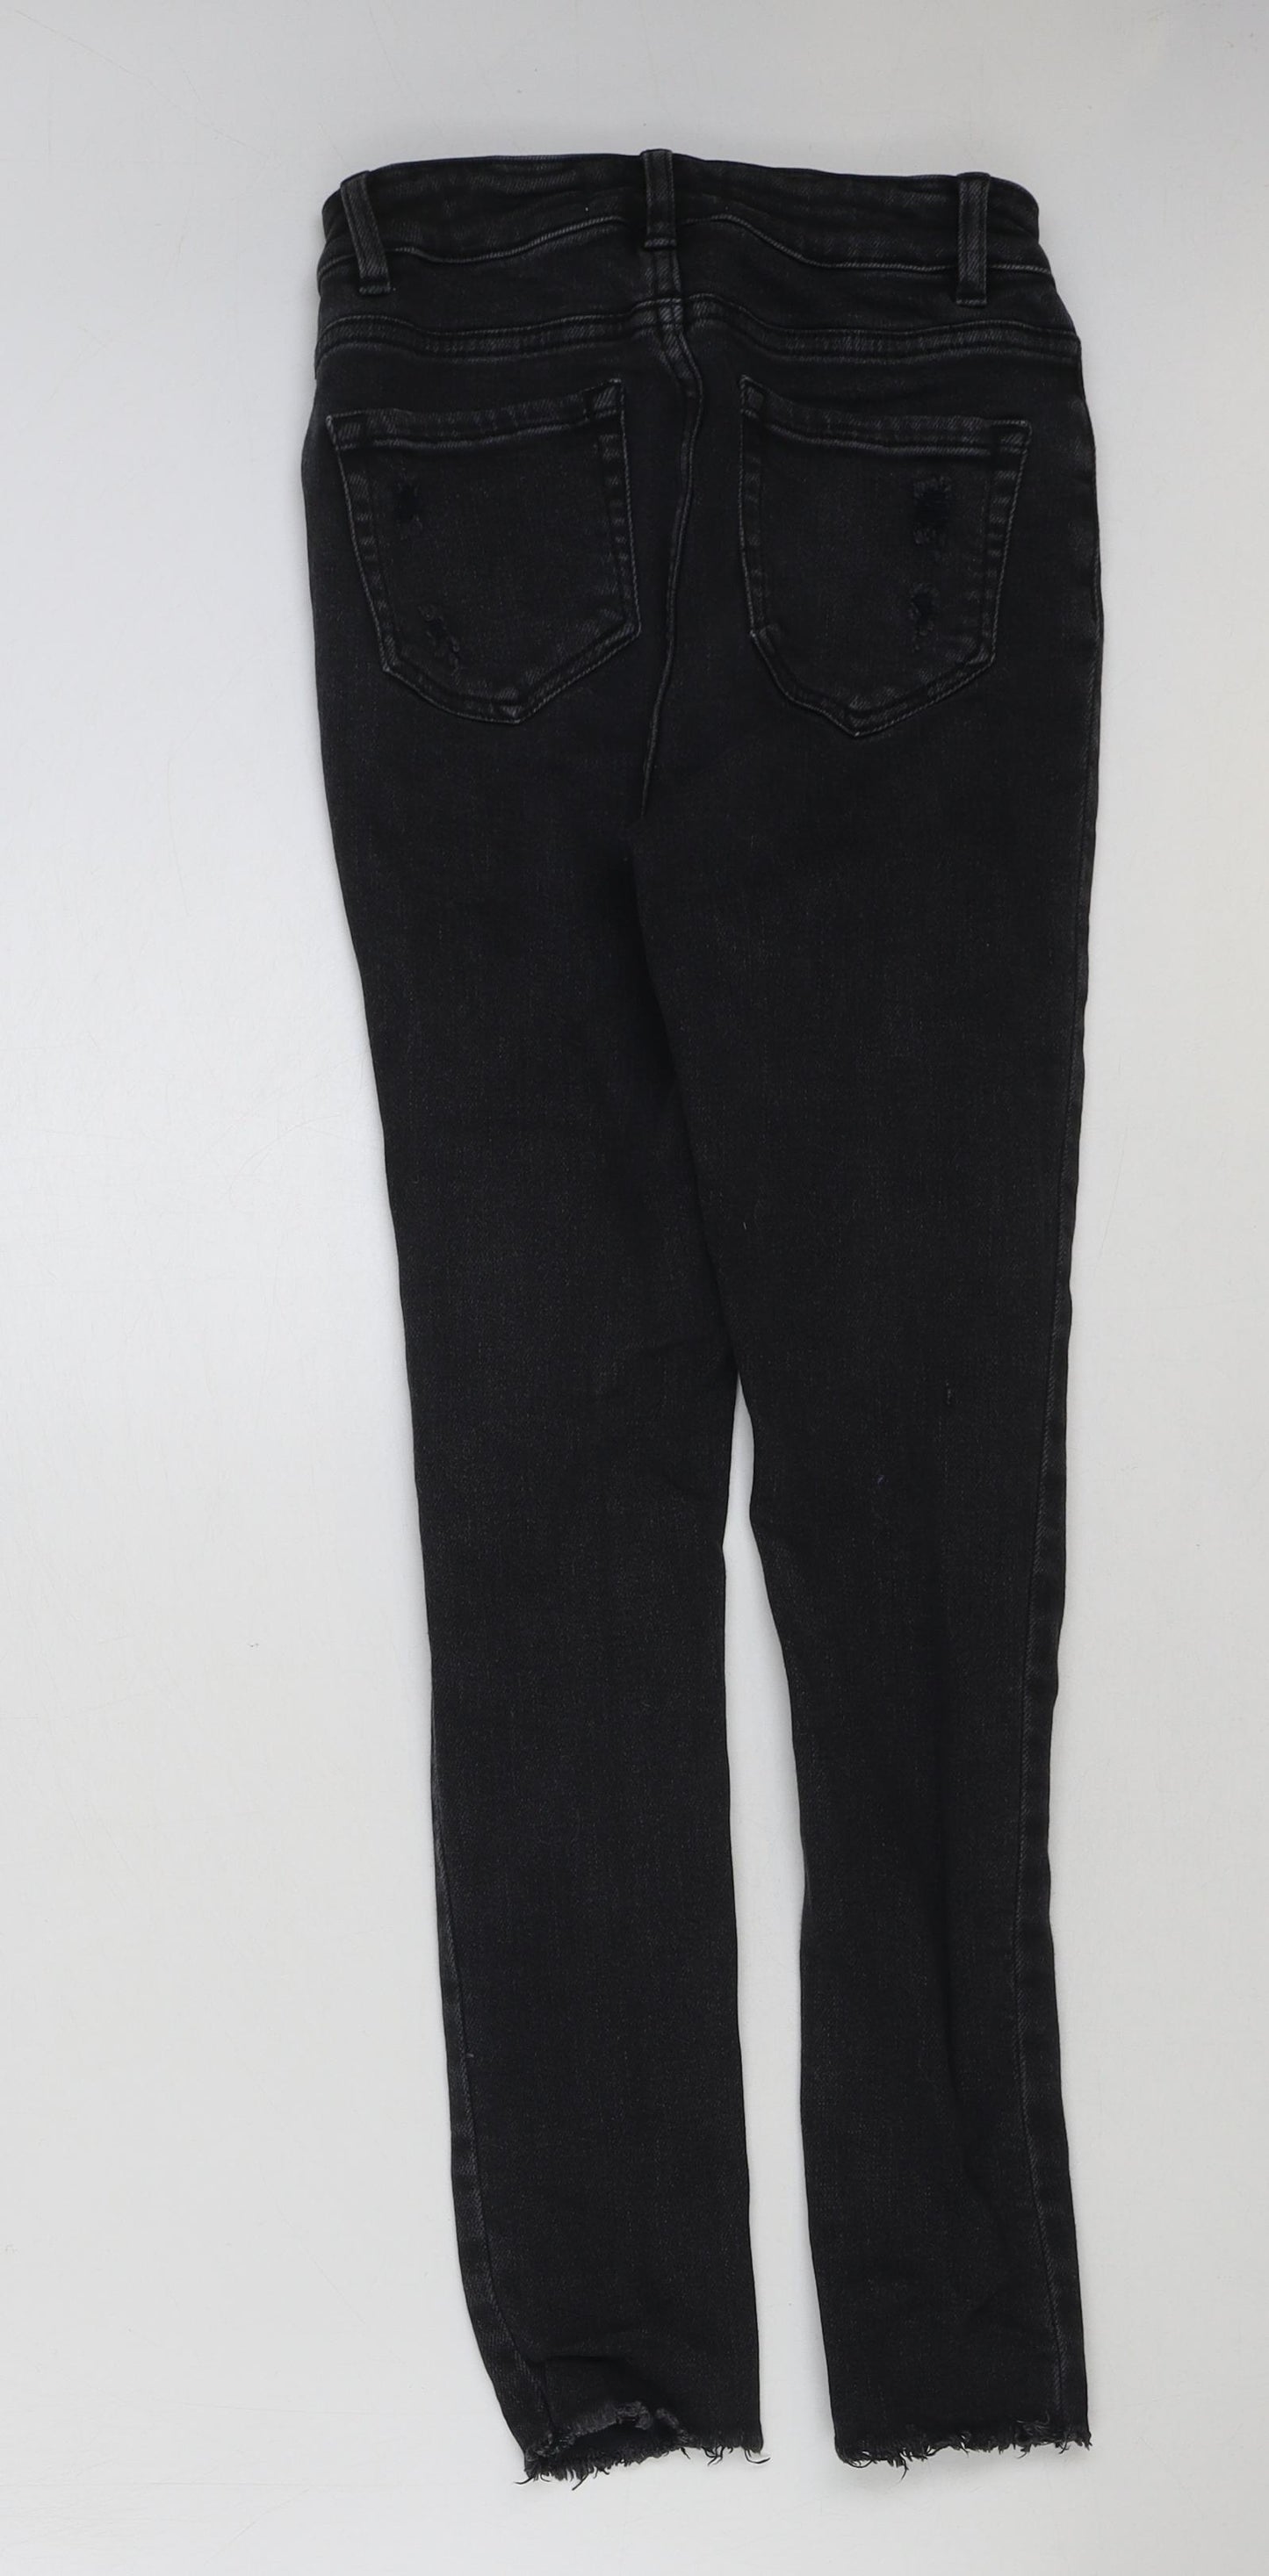 New Look Girls Grey Cotton Skinny Jeans Size 13 Years Regular Button